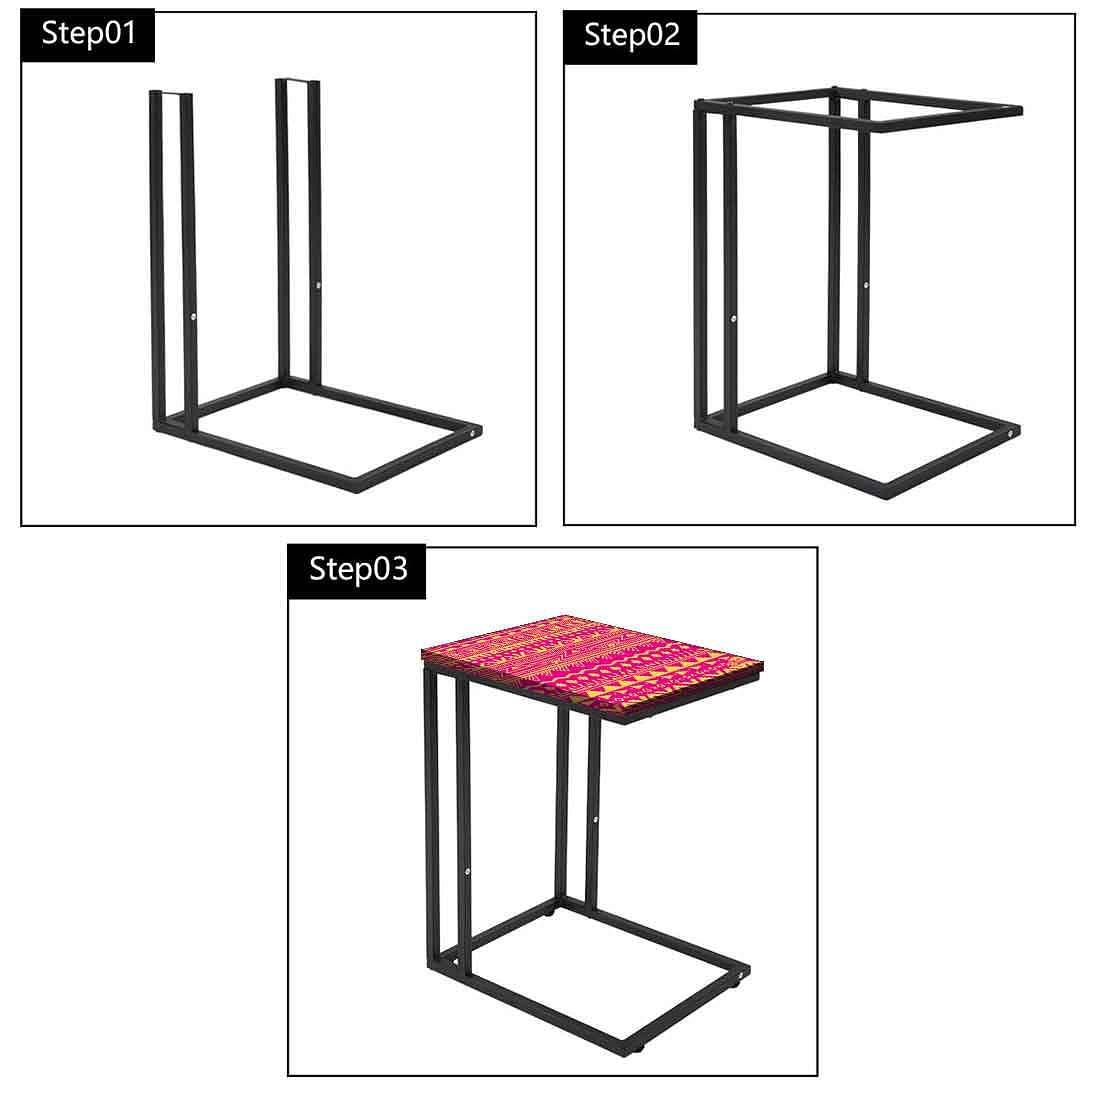 C Shaped End Table For Sofa - Pink Patterns Nutcase